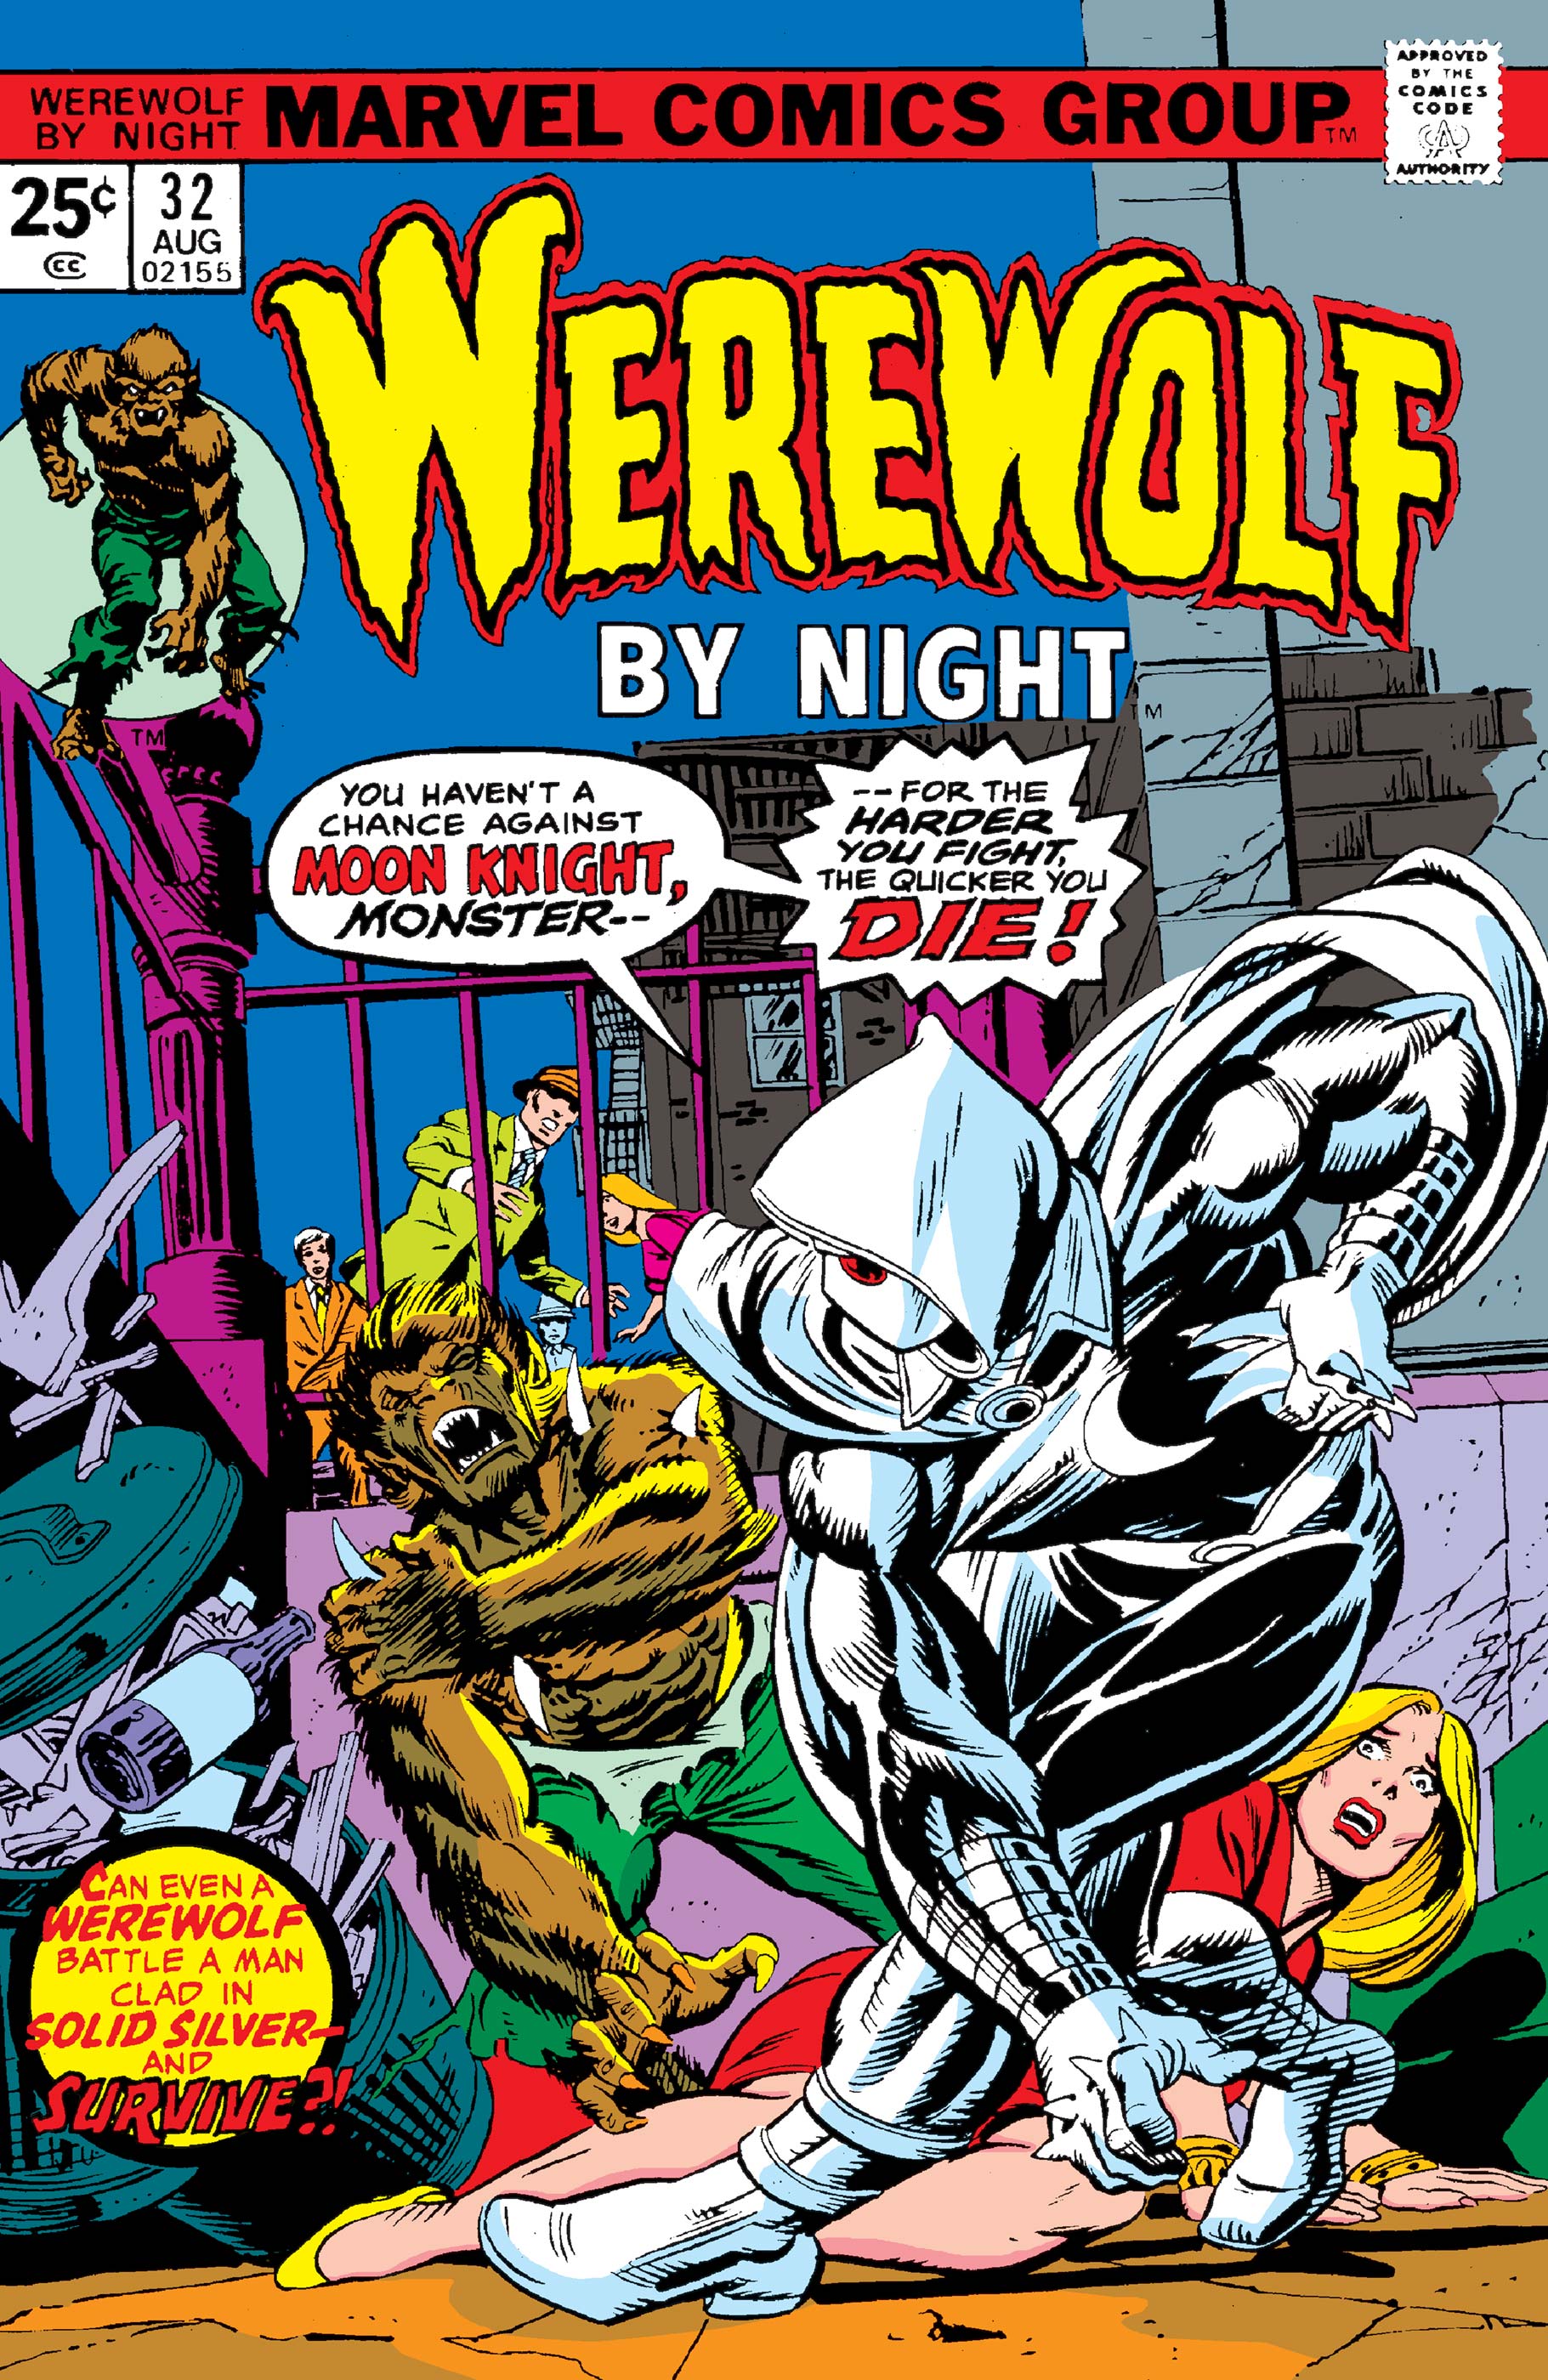 Werewolf By Night (1972) #32 | Comic Issues | Marvel